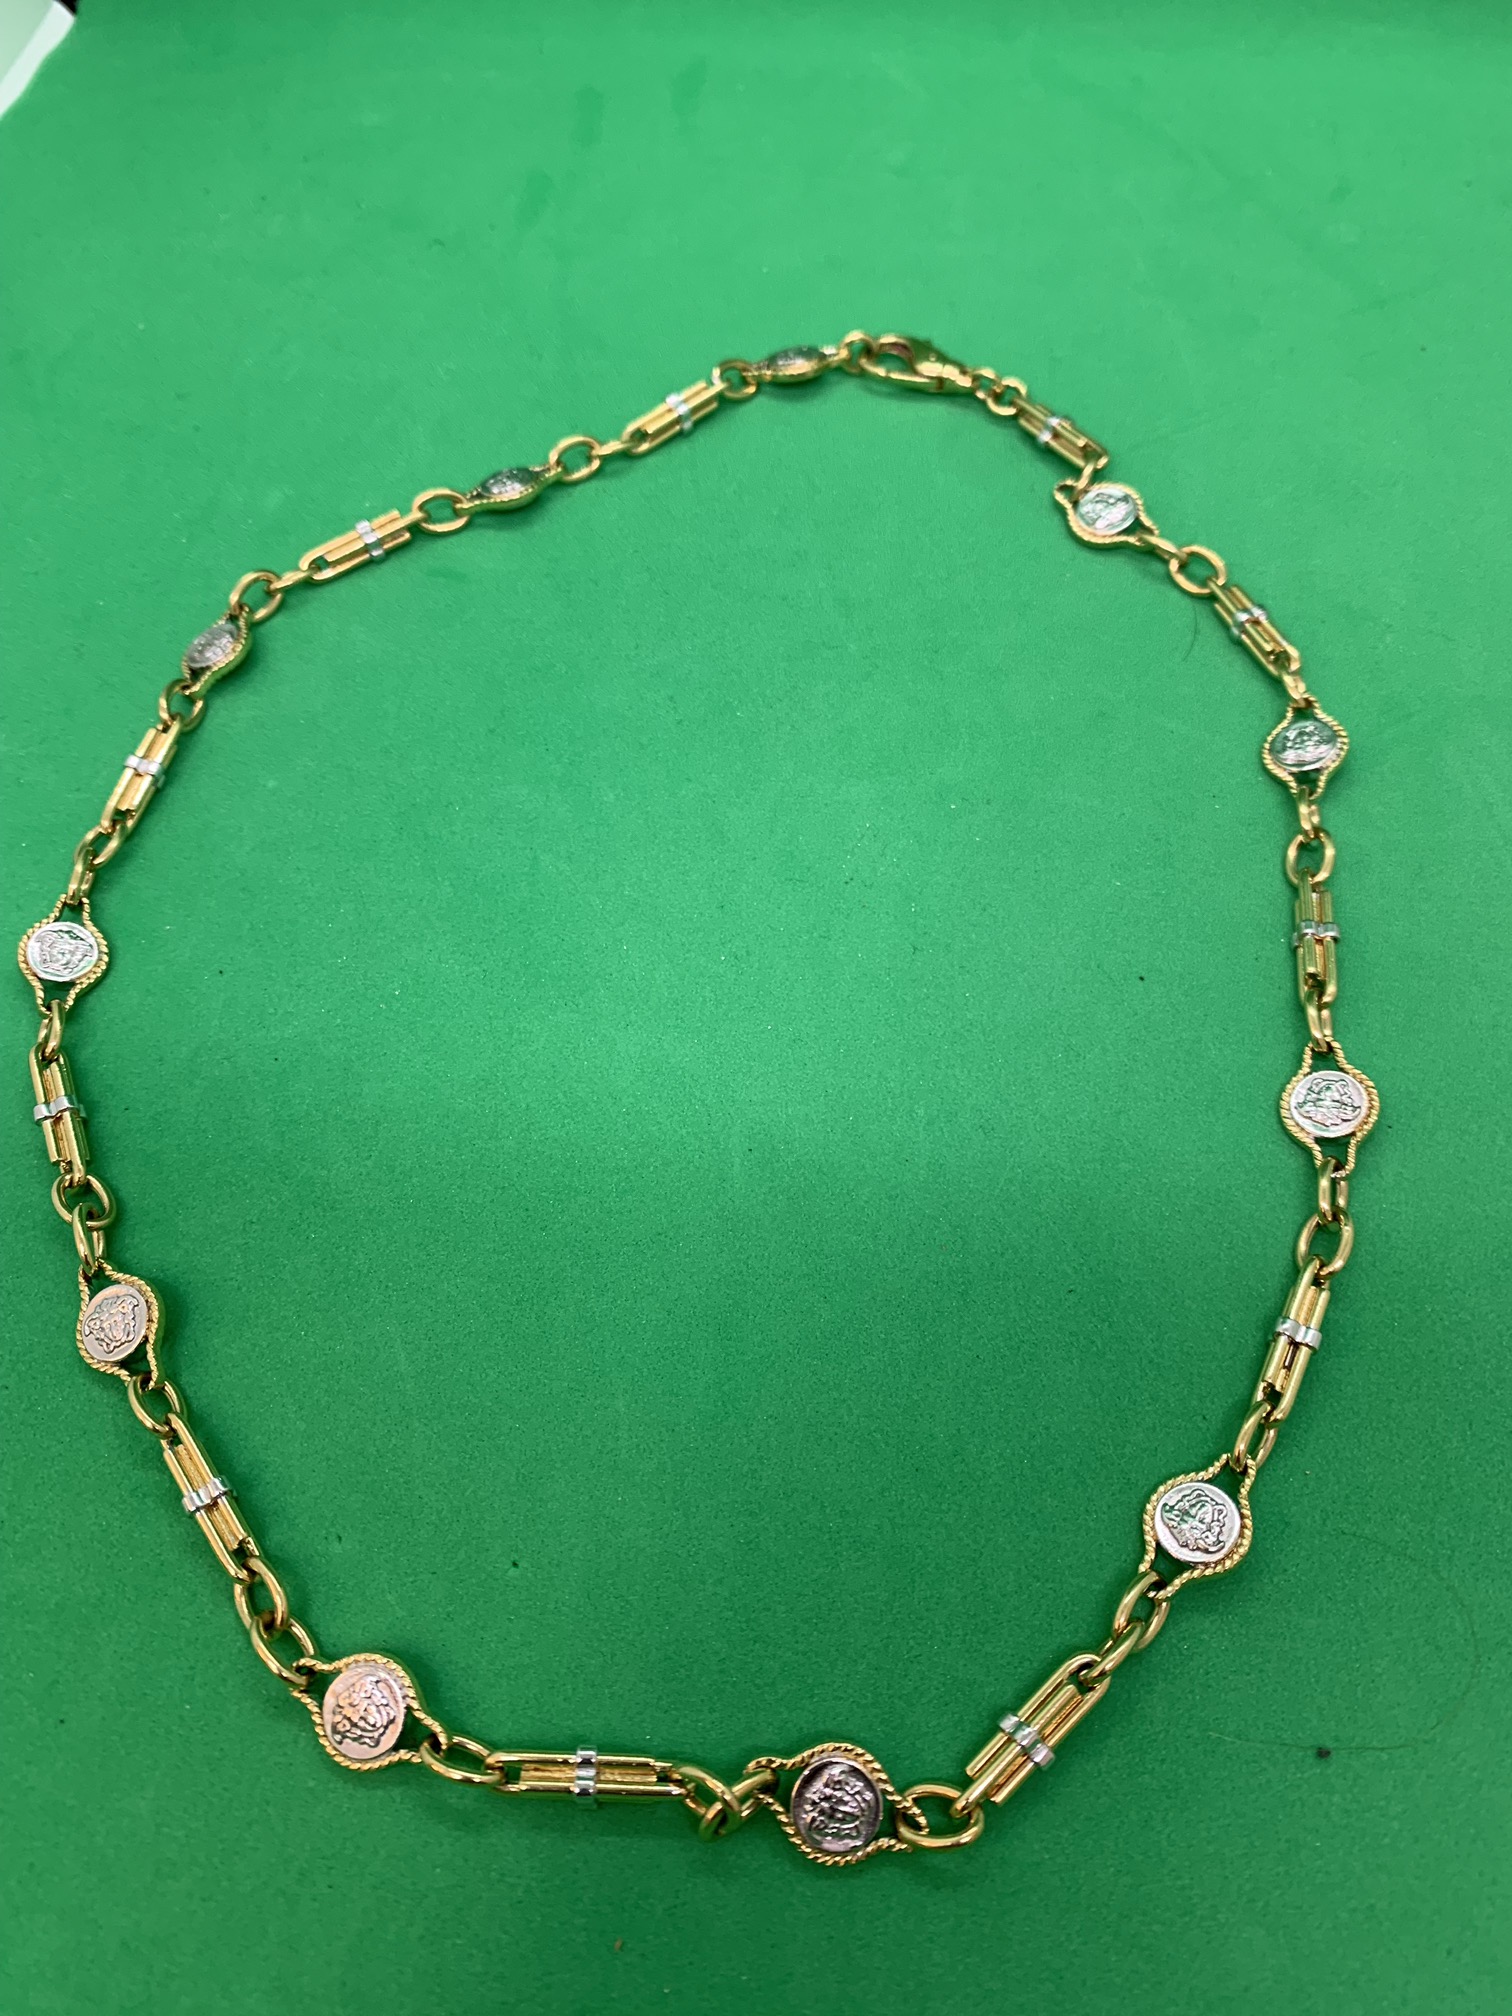 HEAVY 110 GRAMS APPROX VERSACE STYLE GOLD CHAIN - IMPRESSIVE - 24" - Image 3 of 7